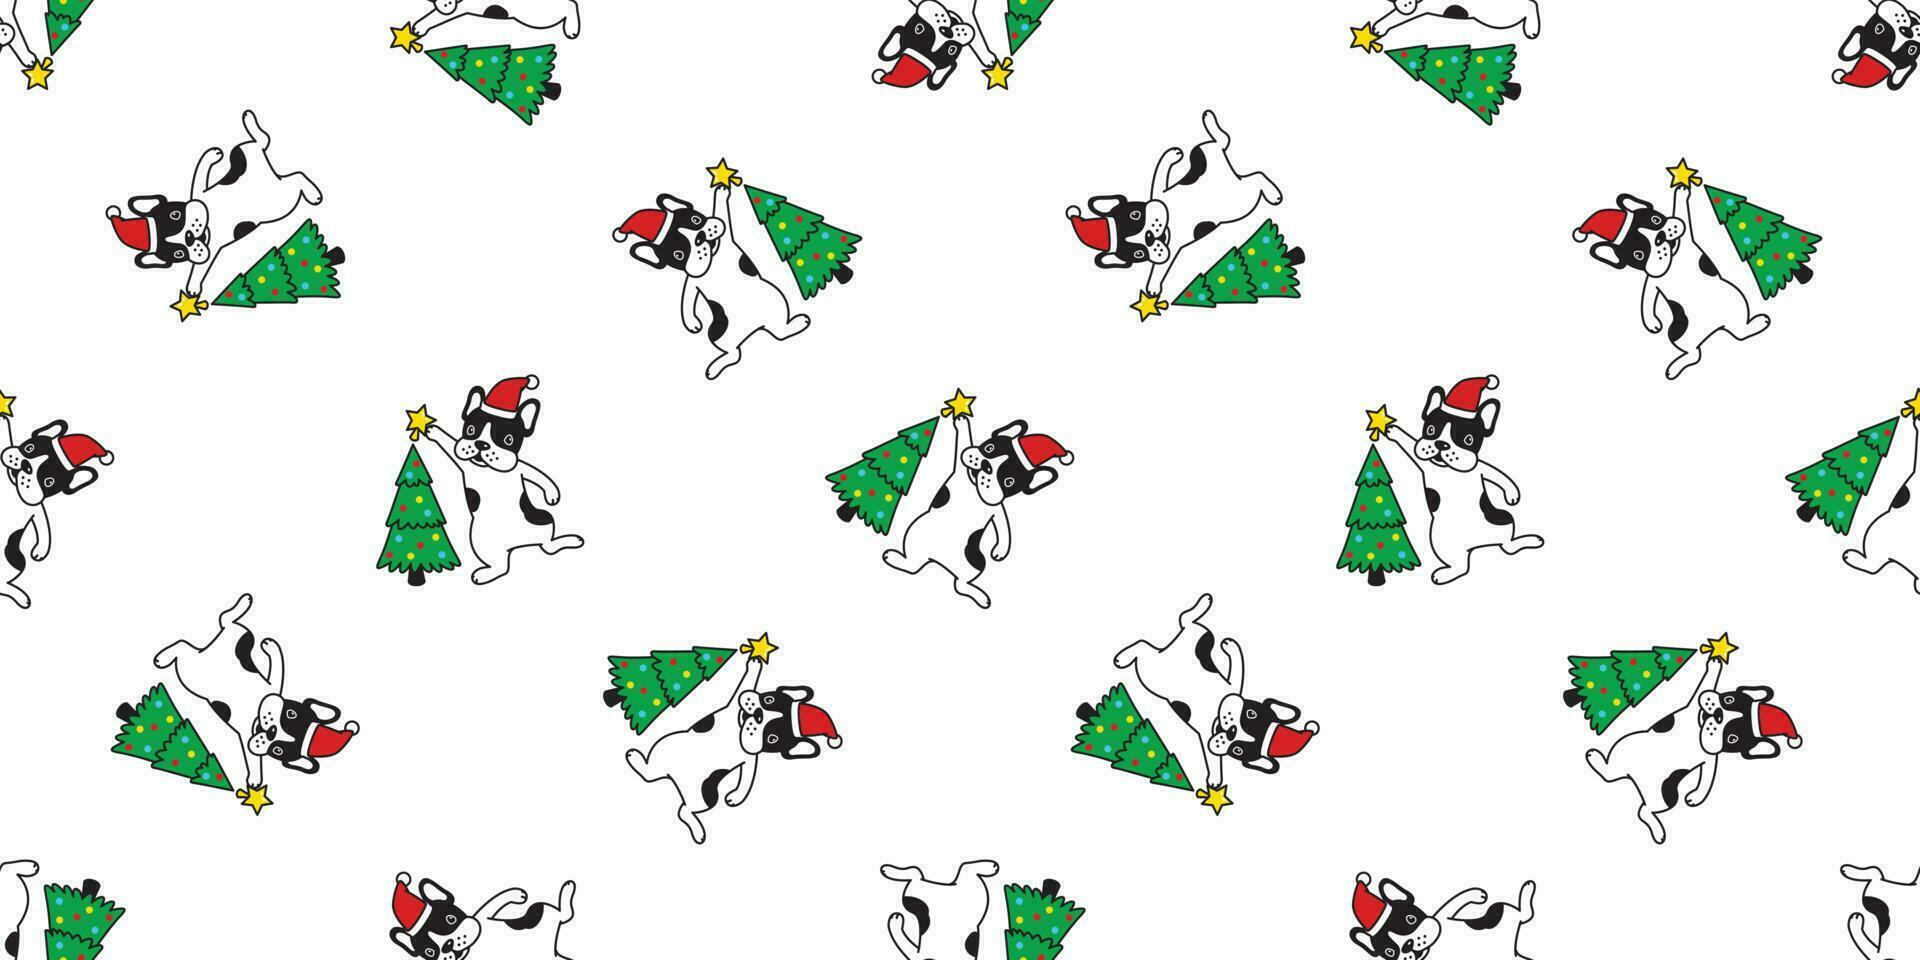 dog seamless pattern vector Christmas tree french bulldog Santa Claus hat scarf isolated repeat wallpaper tile background illustration doodle